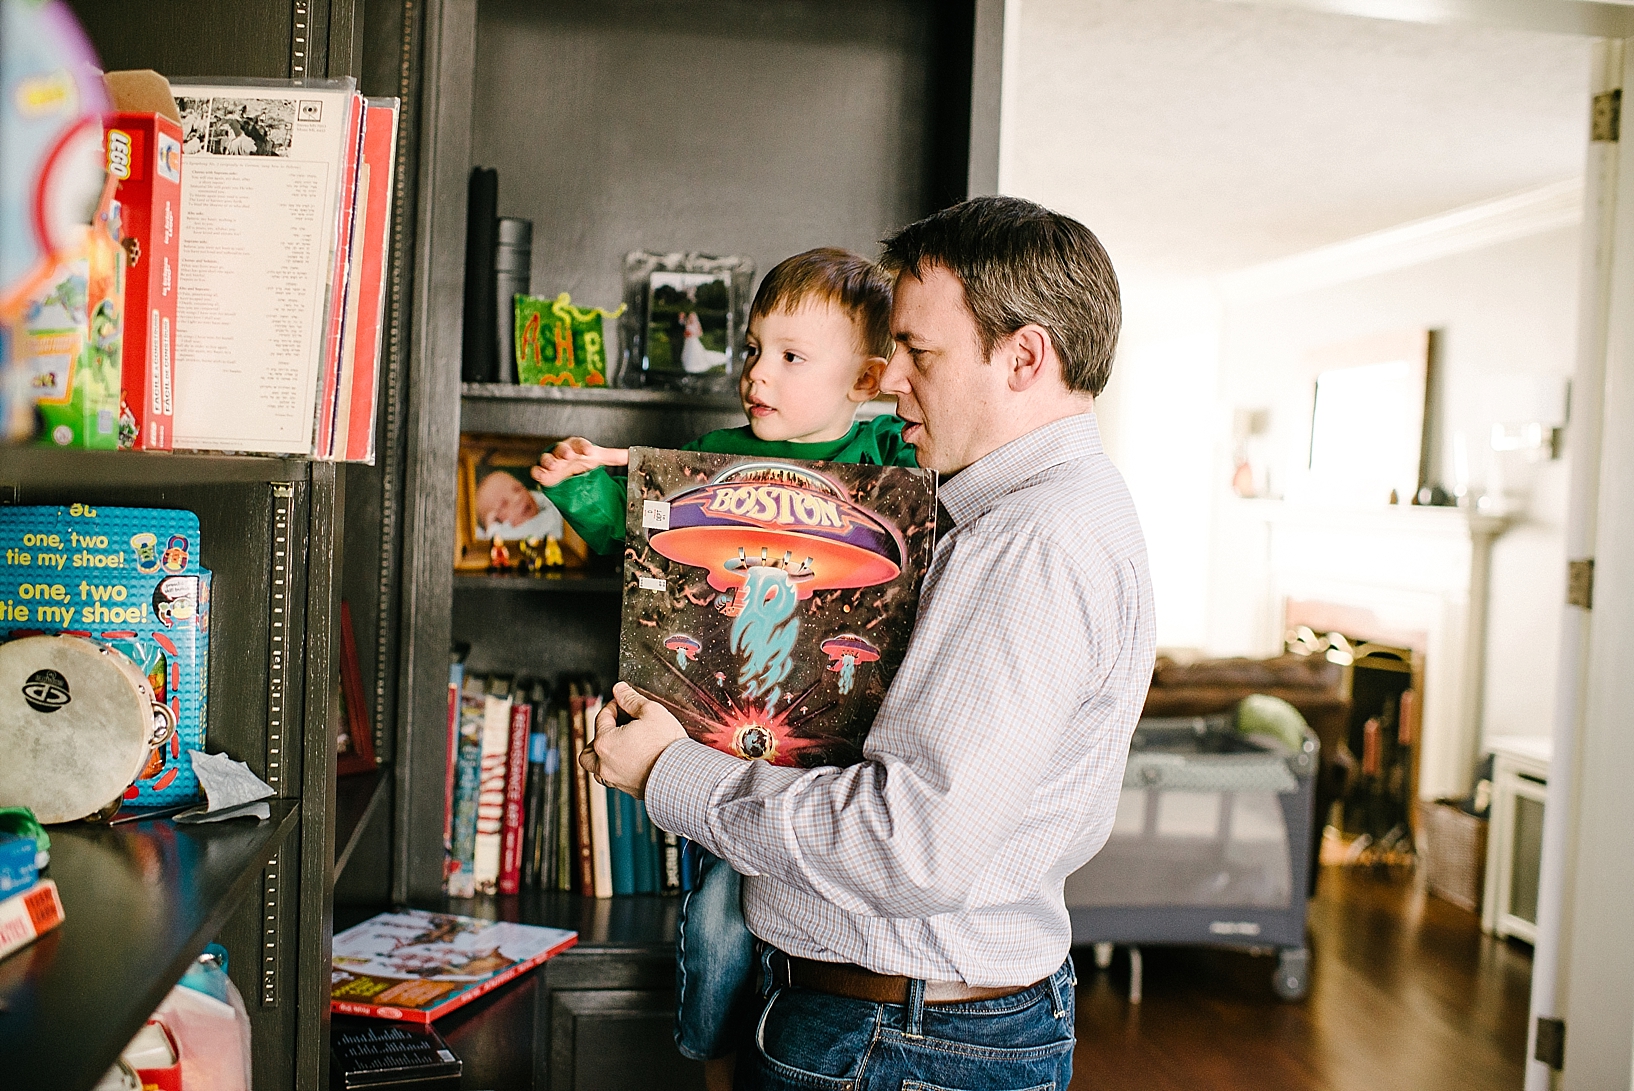 father and son picking out record from bookshelf